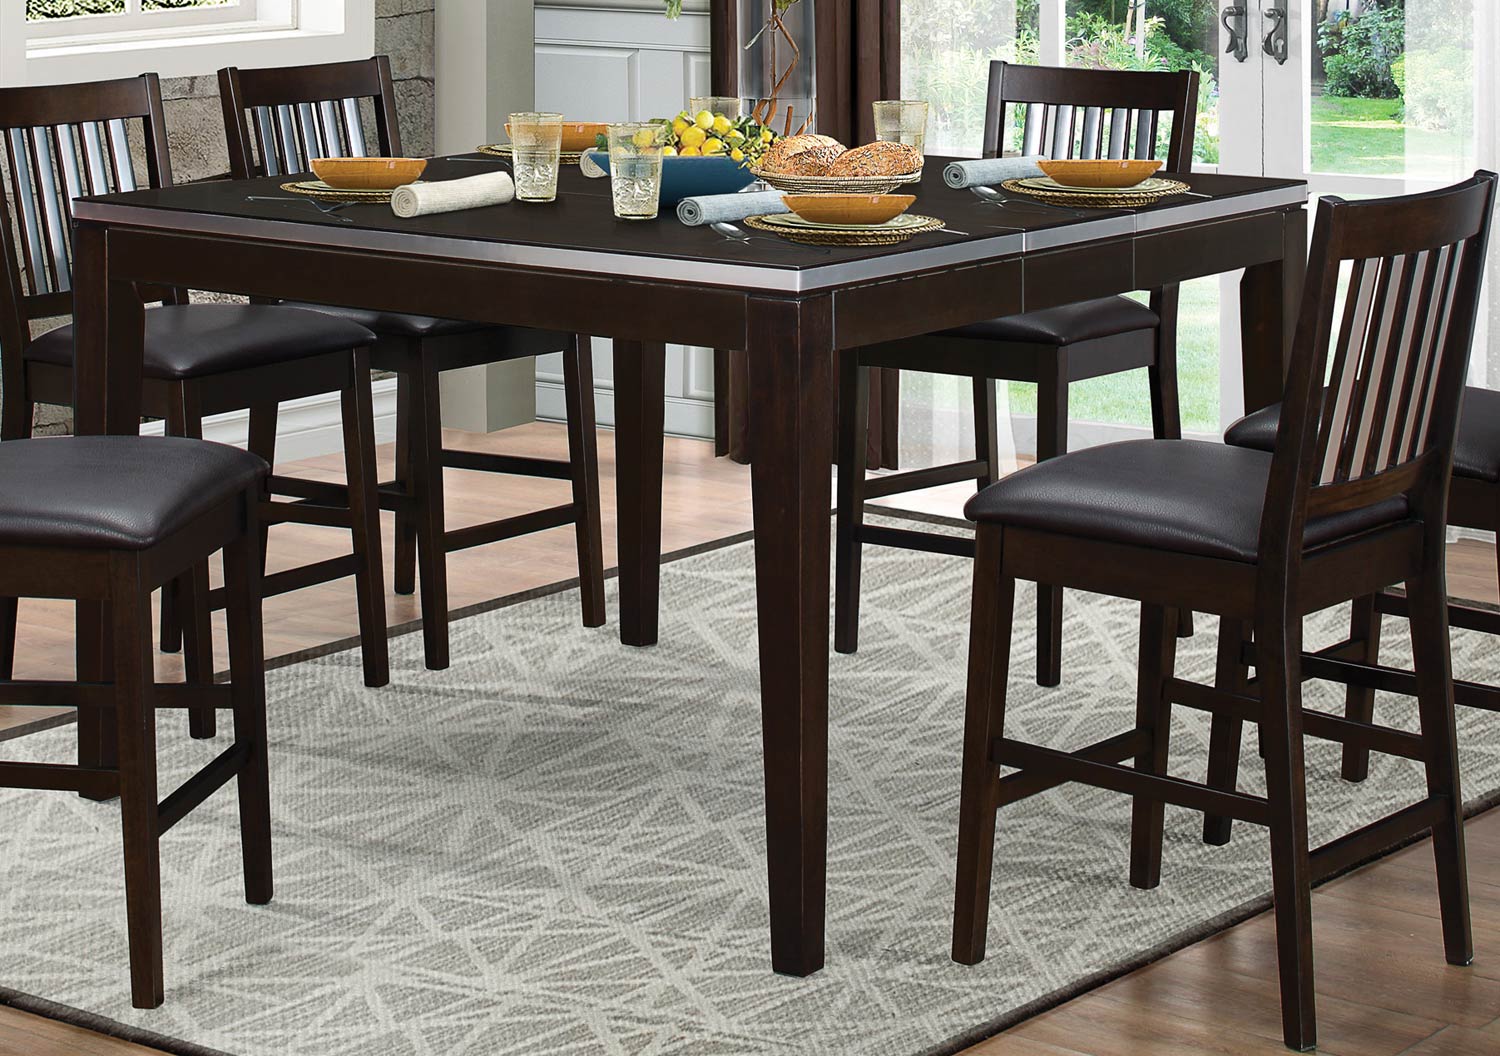 Homelegance Pasco Counter Height Dining Table - Espresso